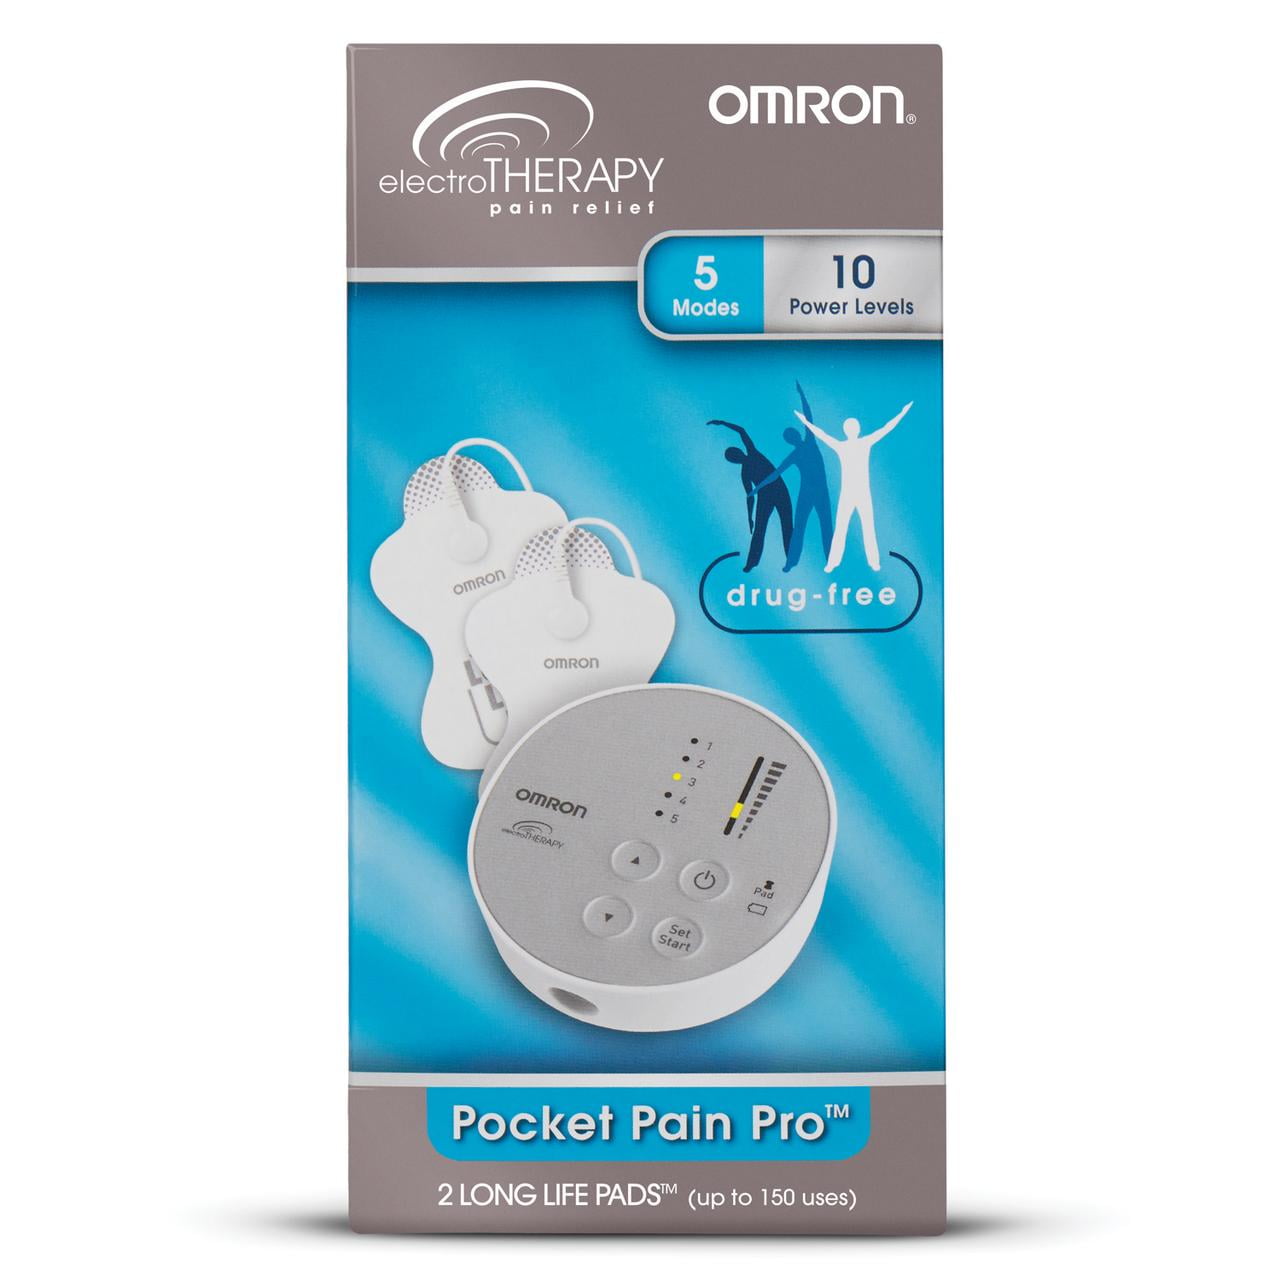 Omron Tens Units: Assistance for Two Different Stories with Drug-Free Pain  Relief